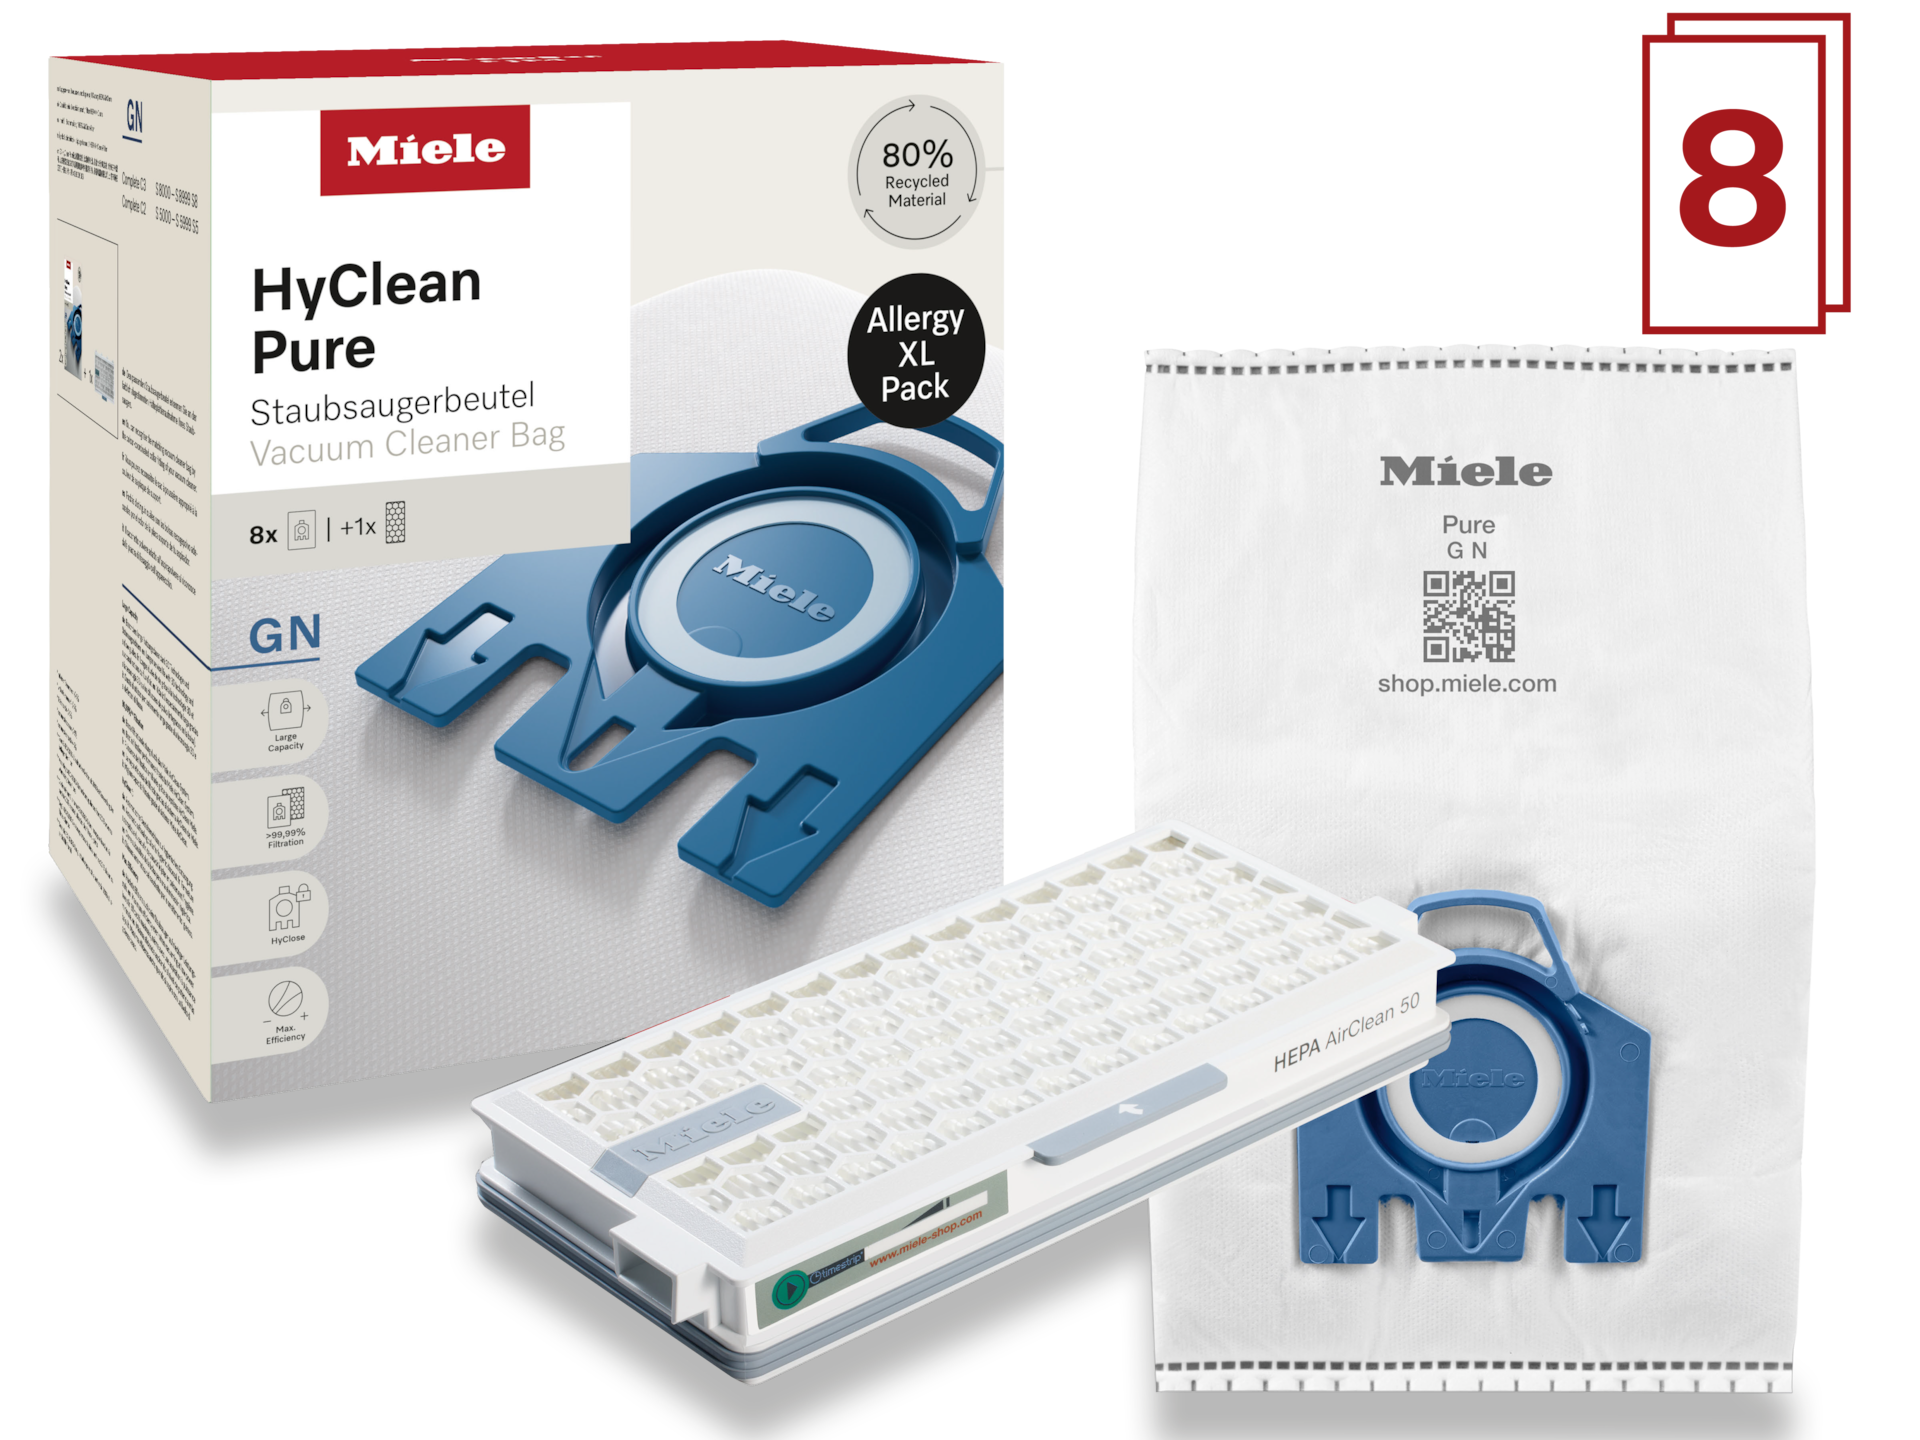 Accessories - GN Allergy XL HyClean Pure - 2